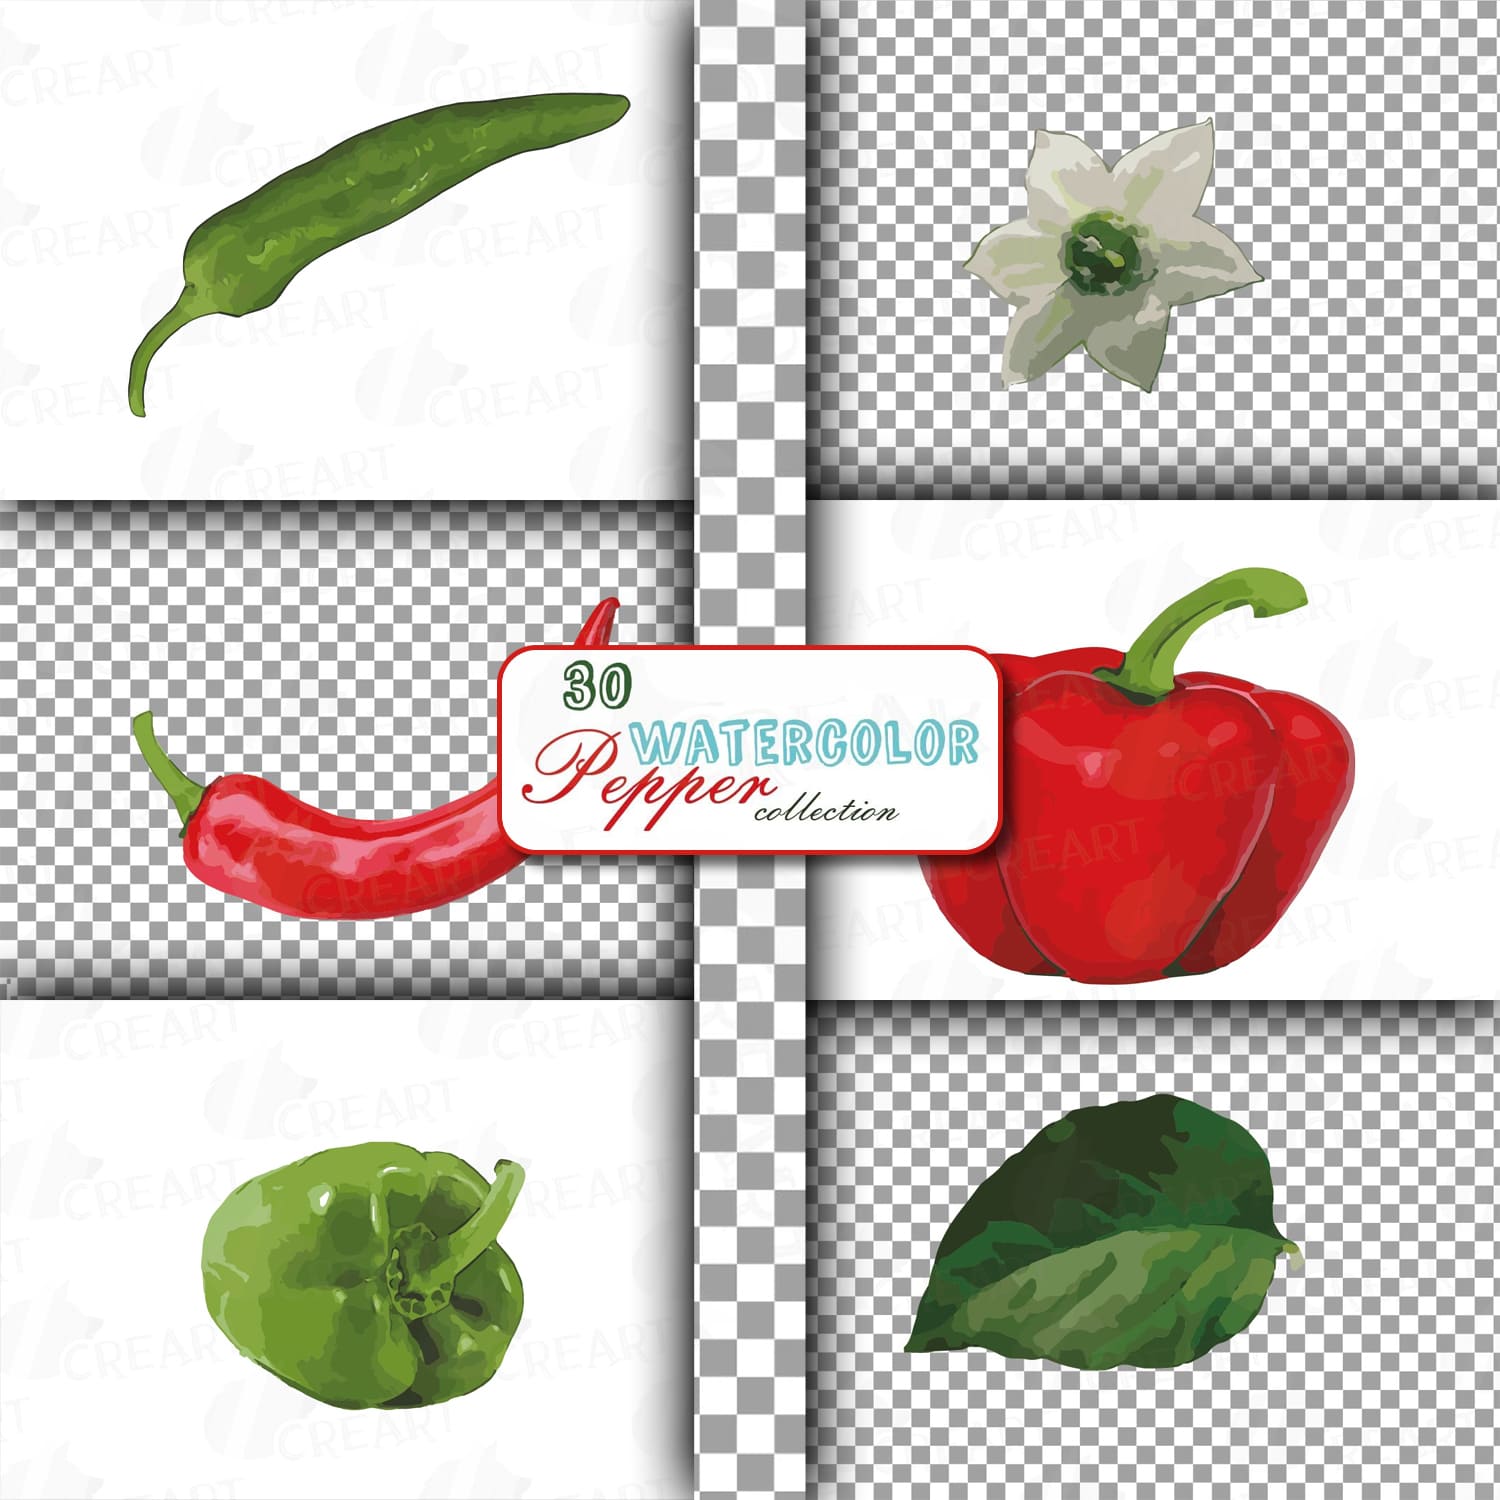 Watercolor peppers clip art pack, green and colorful peppers cover.